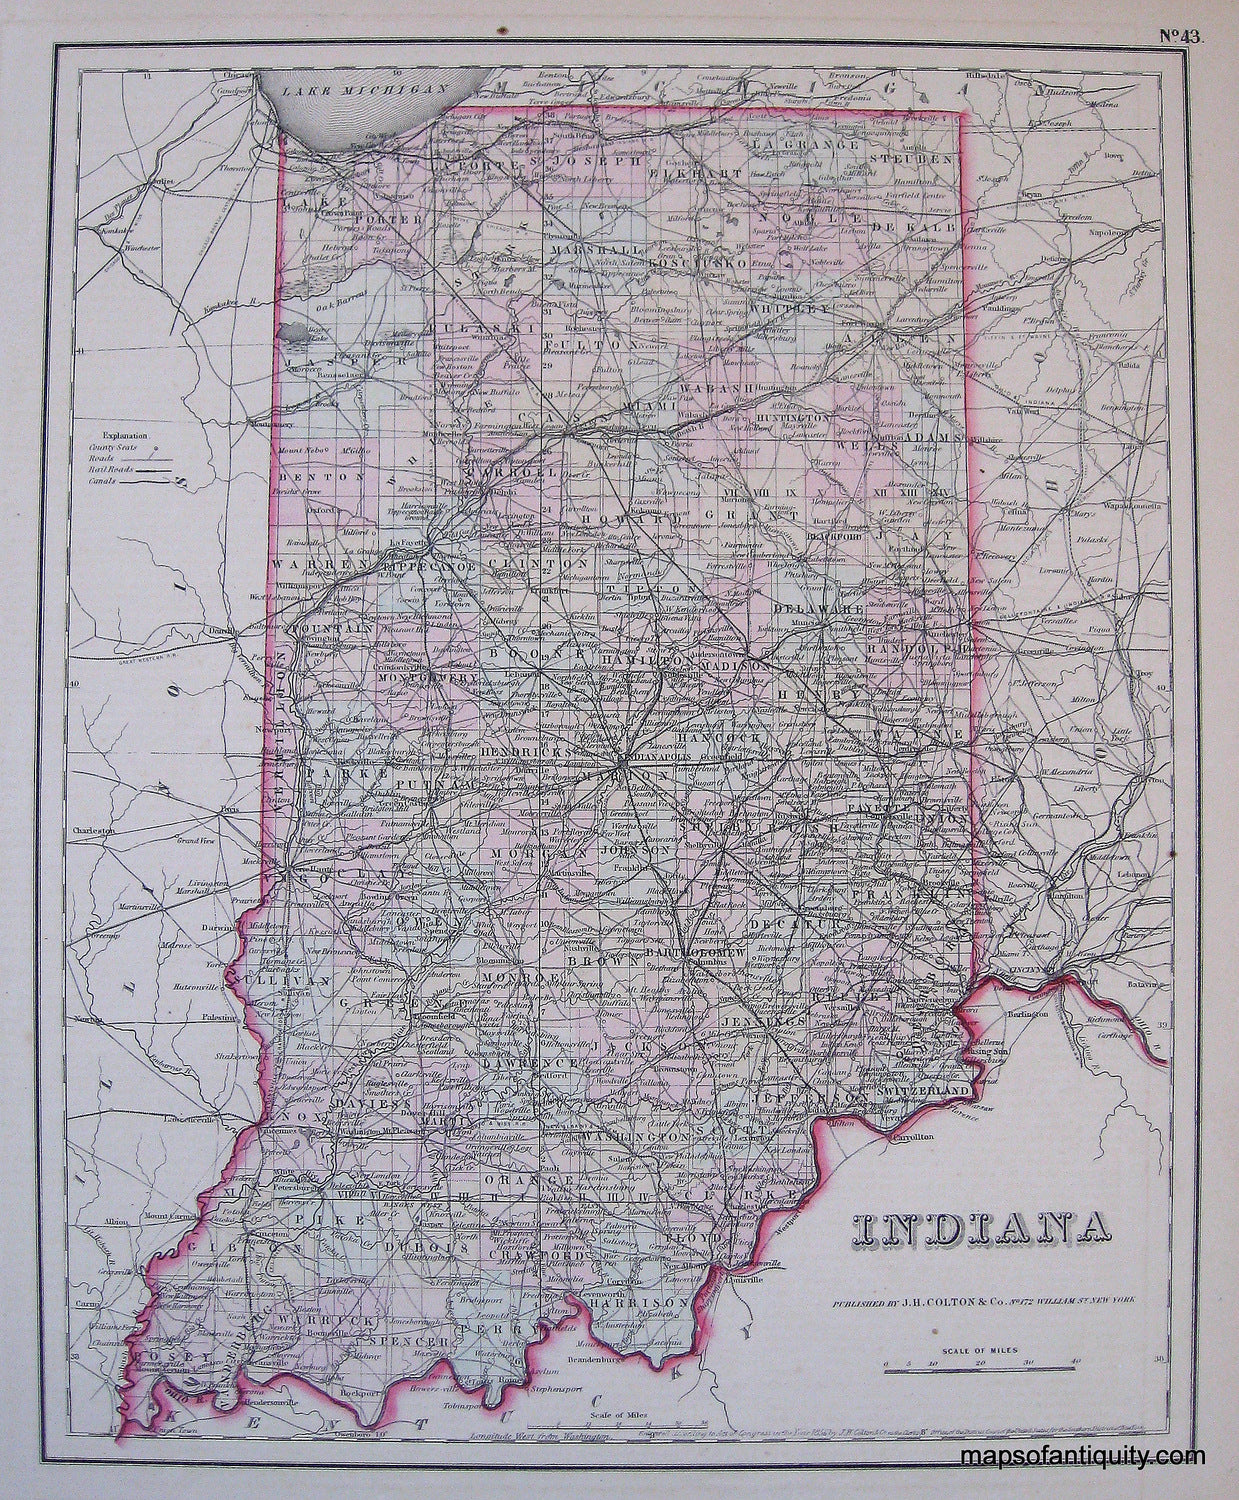 Antique-Hand-Colored-Map-Indiana-United-States-Indiana-1857-Colton-Maps-Of-Antiquity